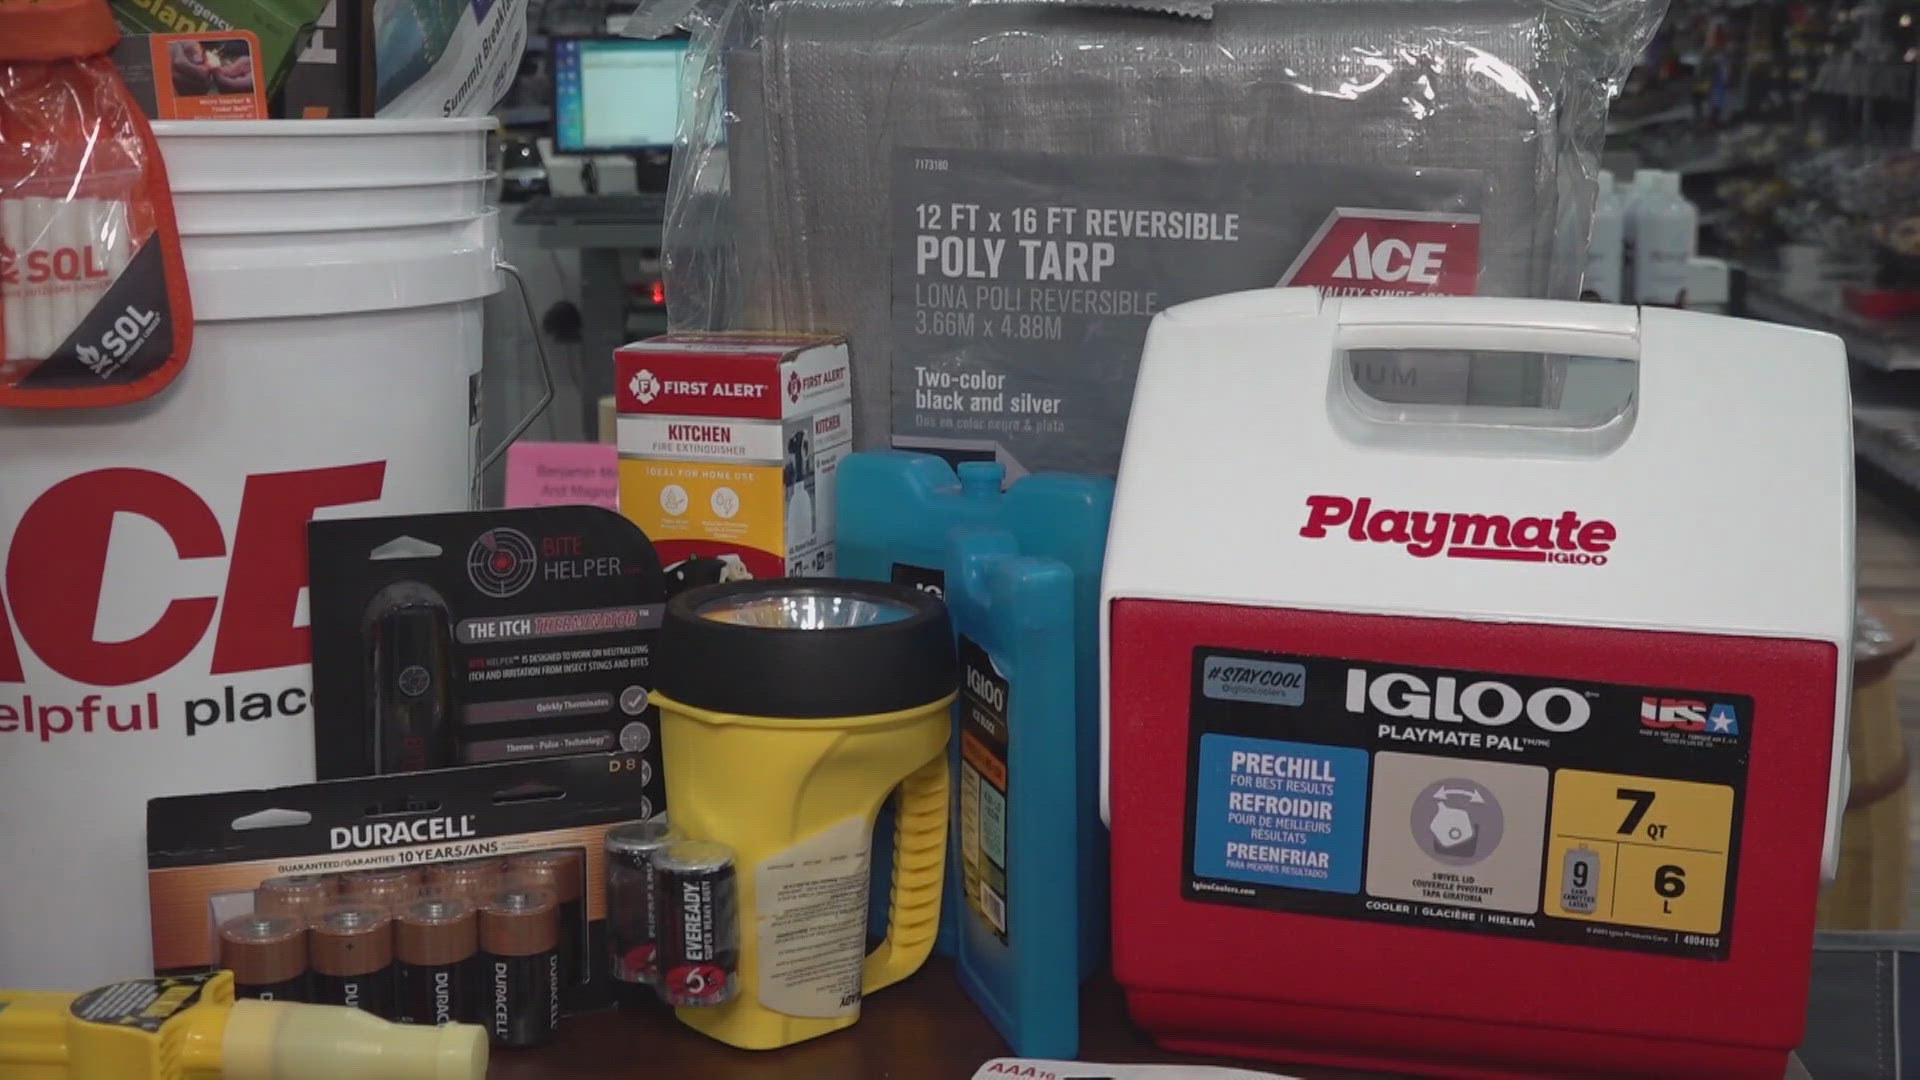 With severe weather in Central Texas this weekend, here are some deals on emergency equipment that could come in handy.